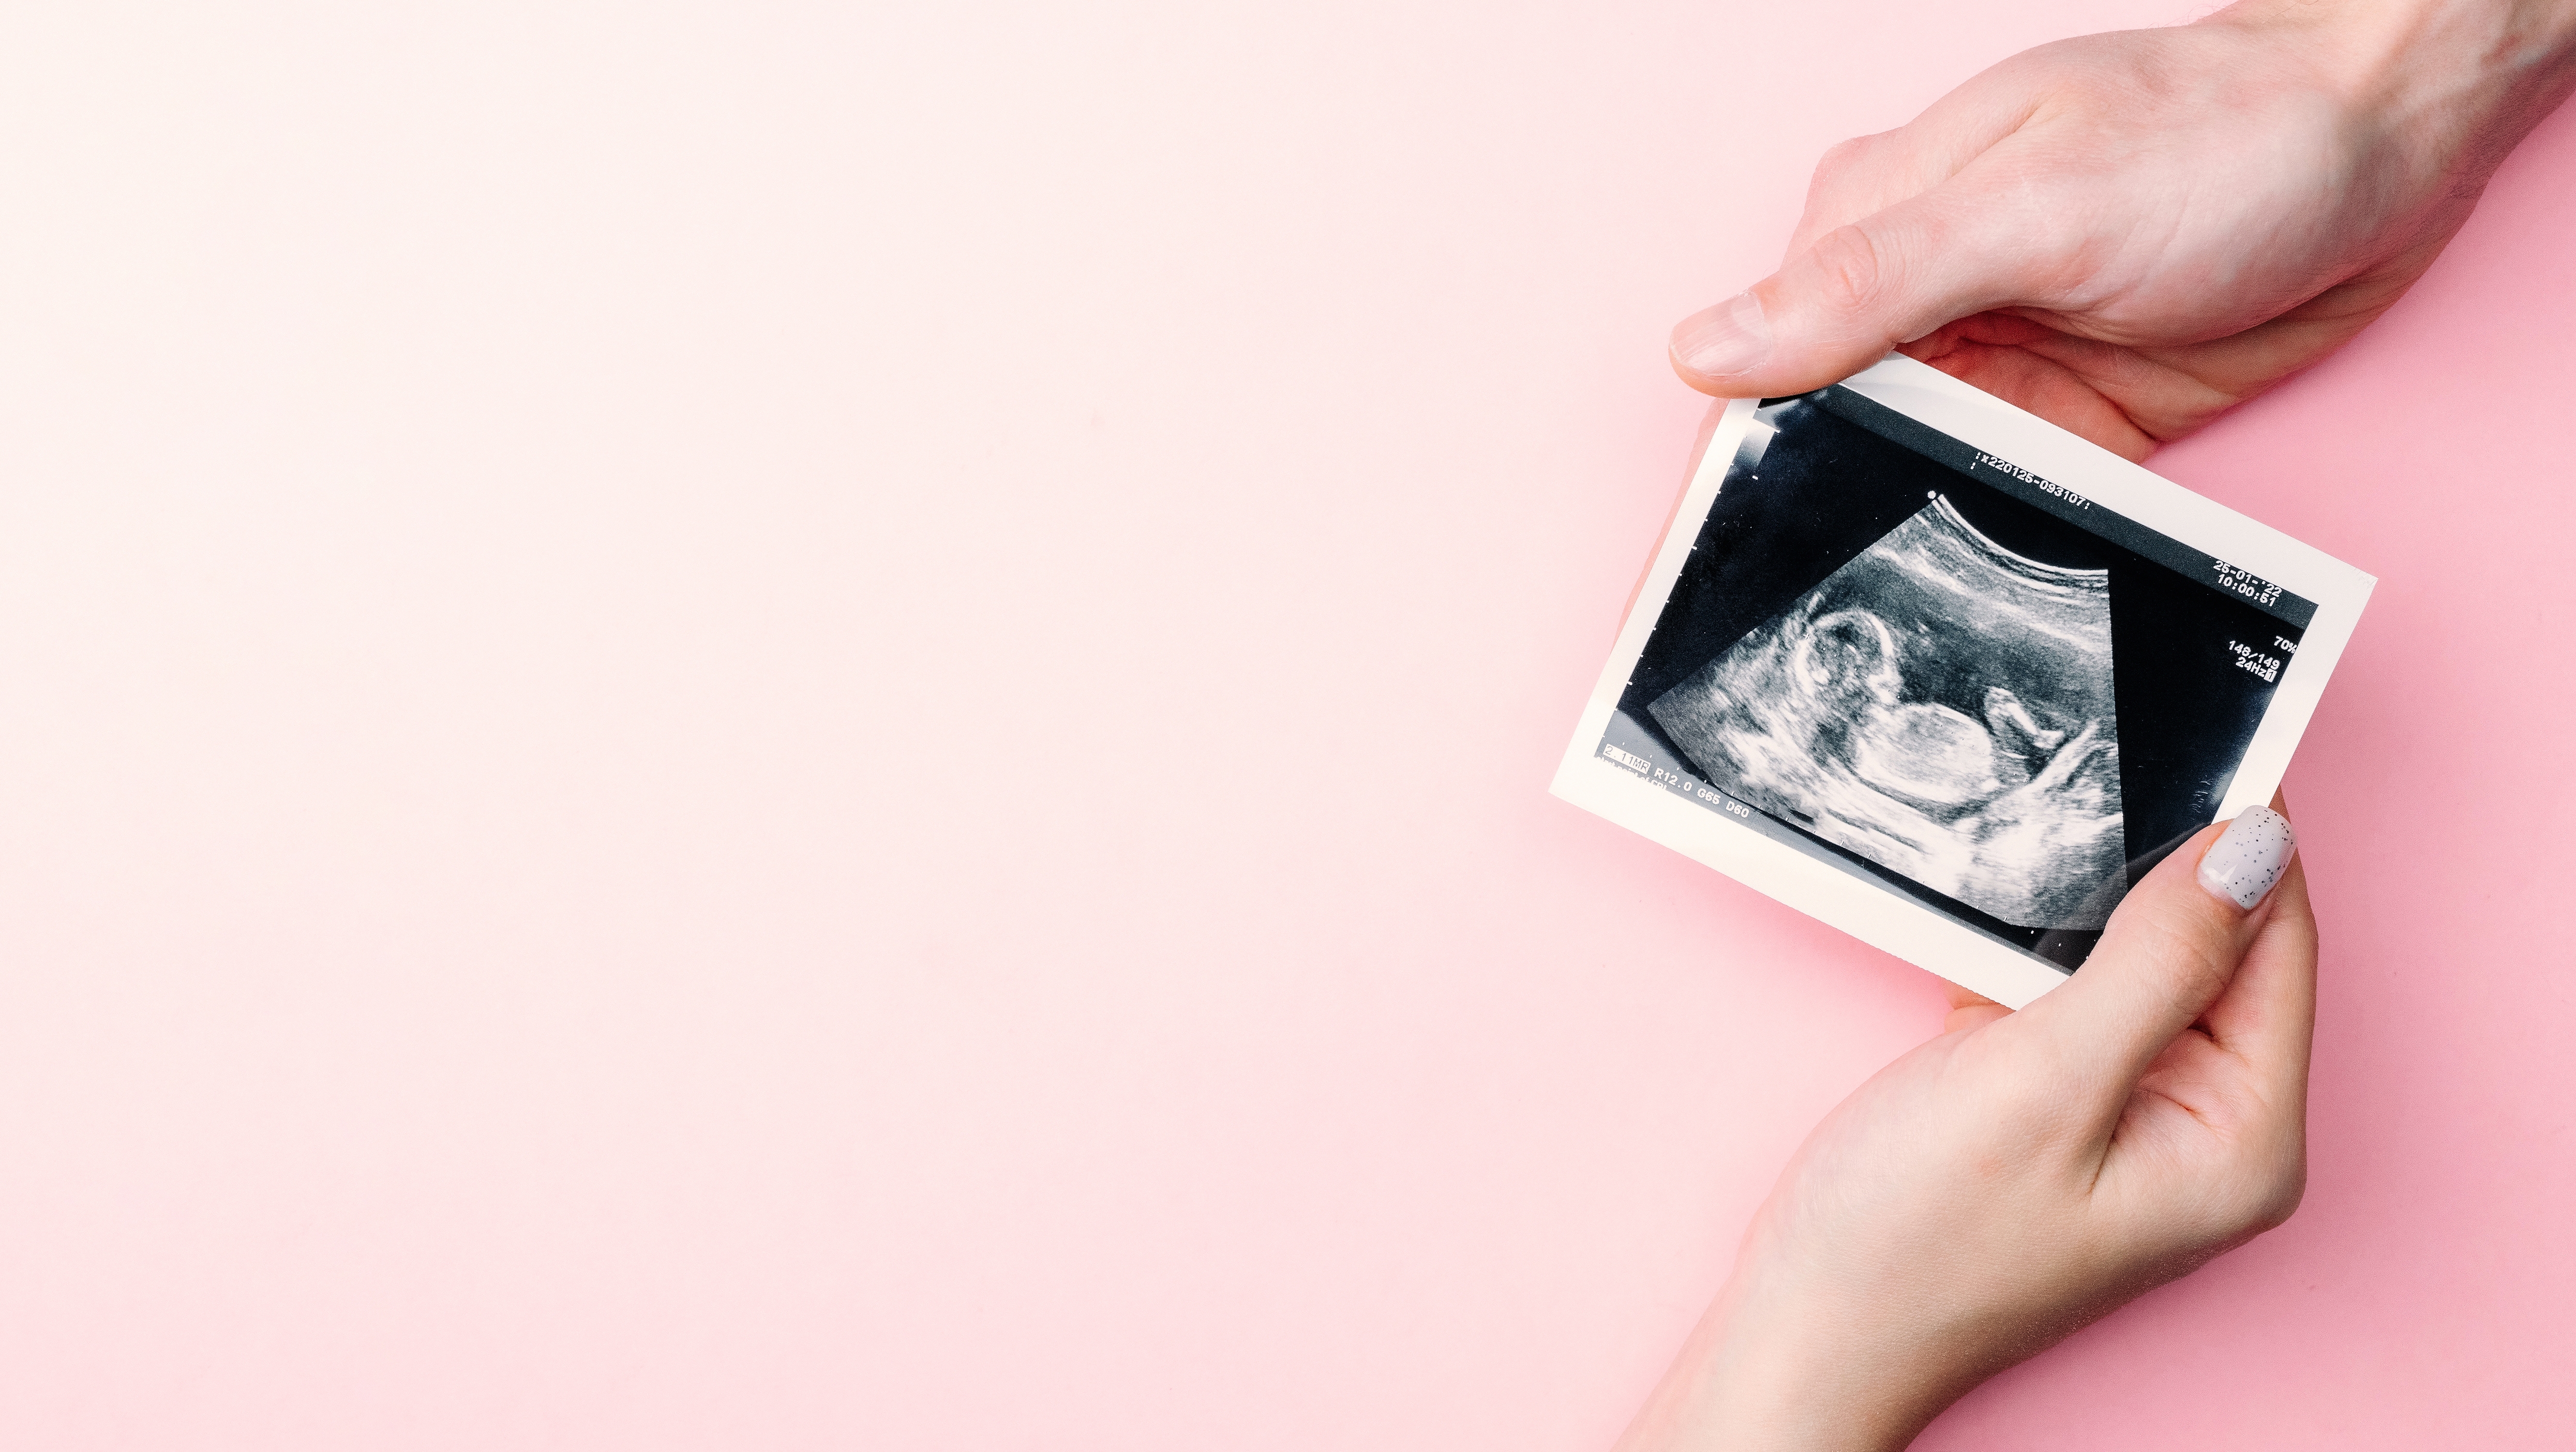 Ultrasound image pregnant baby photo | Source: Shutterstock